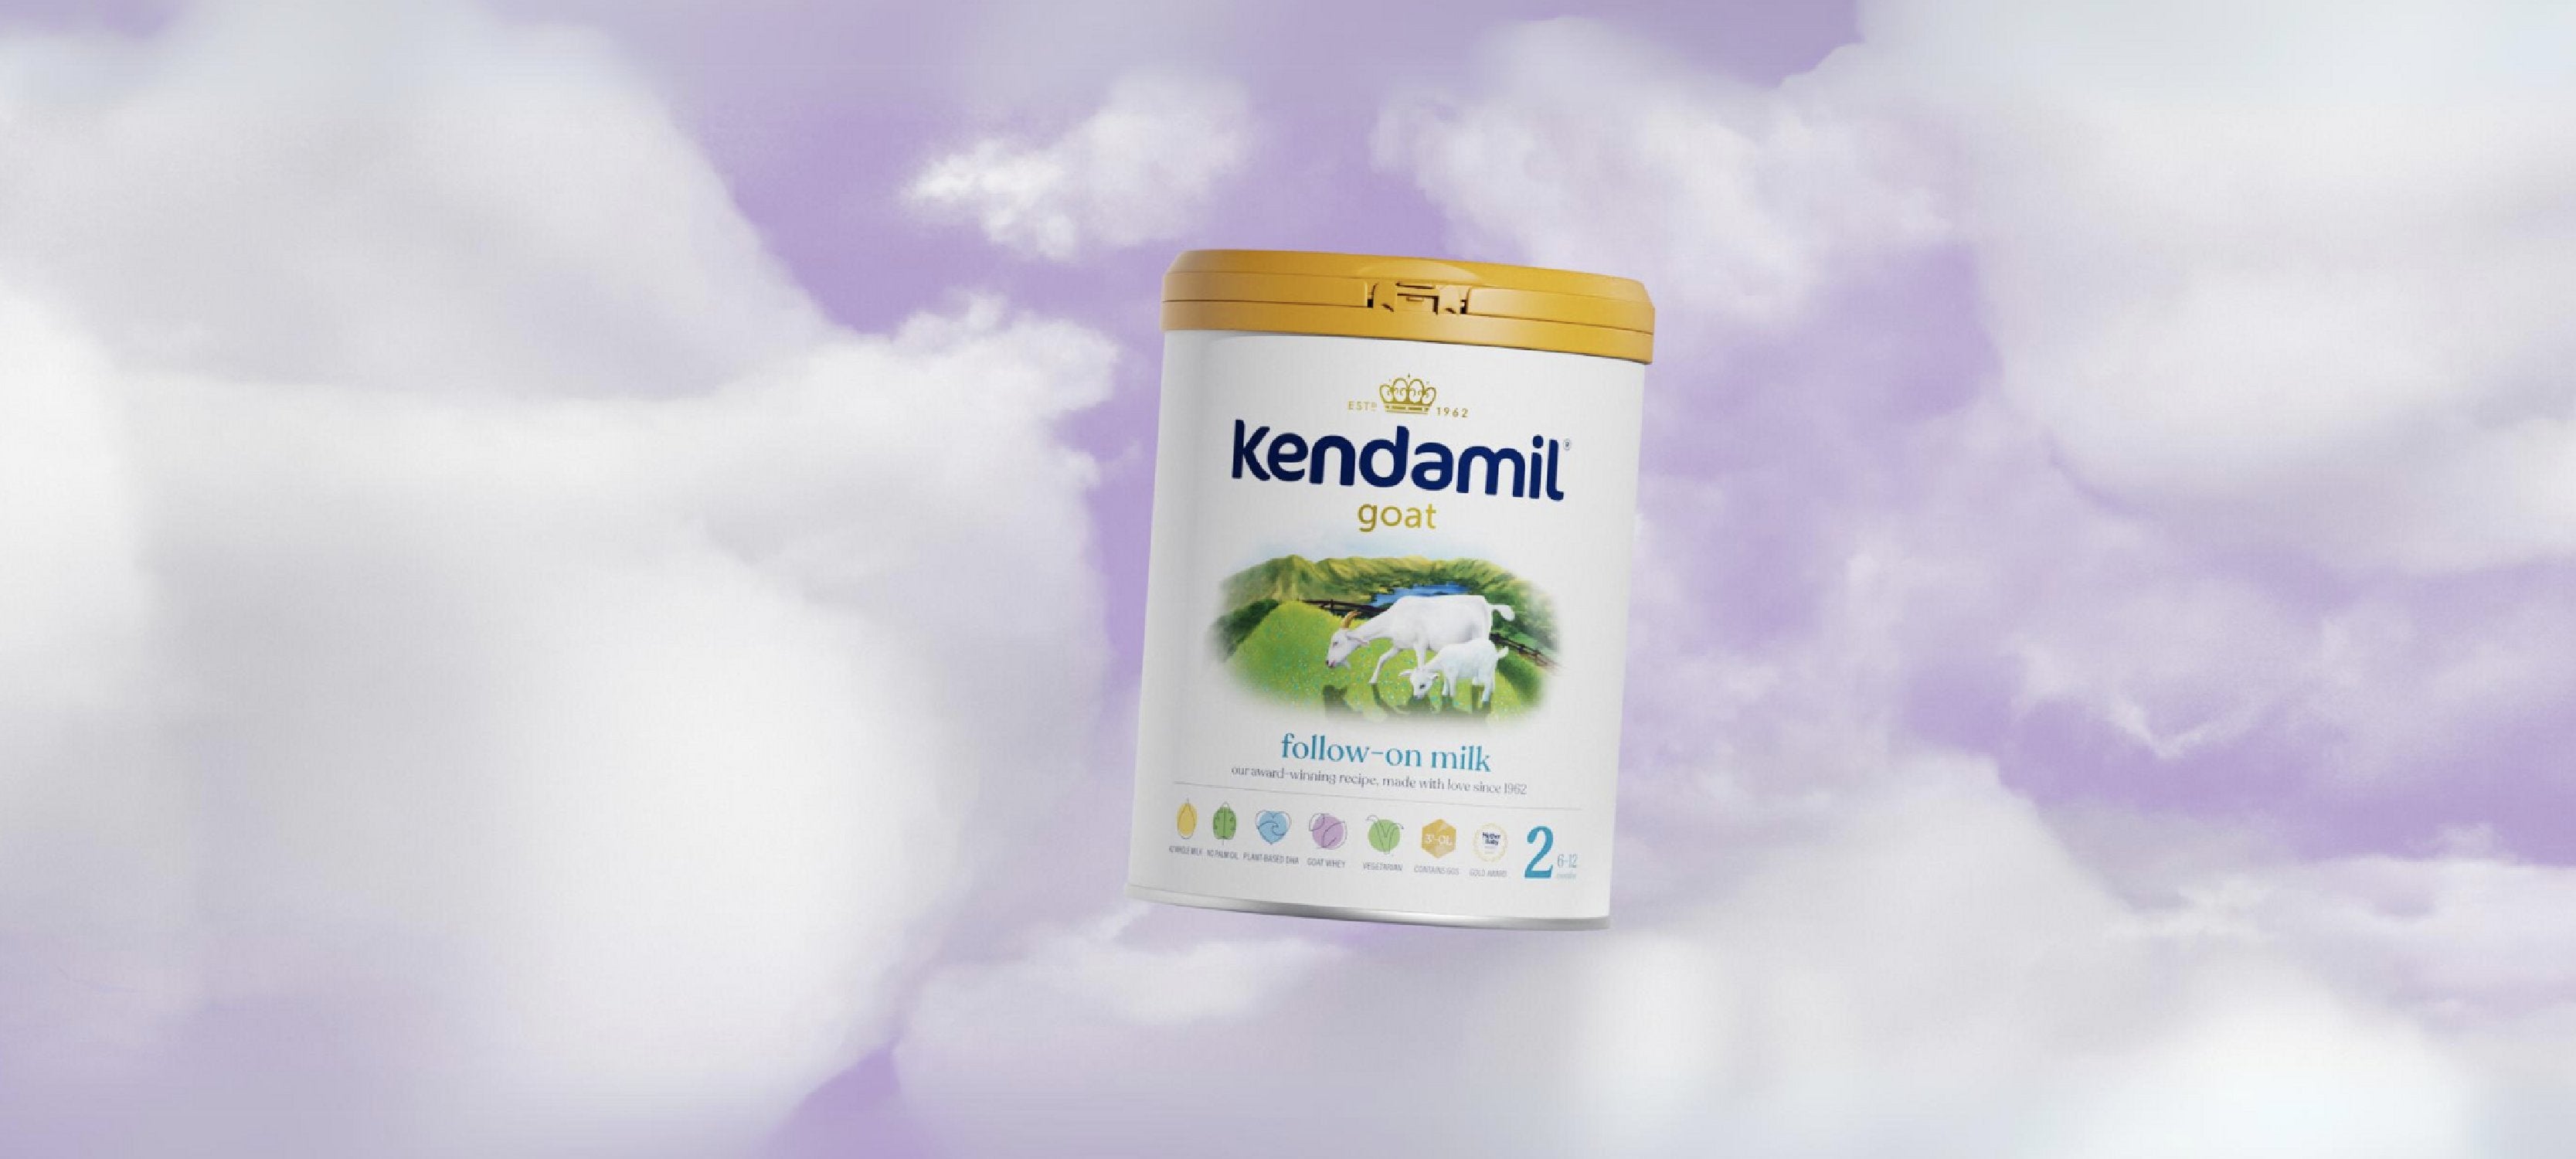 Baby's hand - Kendamil Goat Baby formula collection